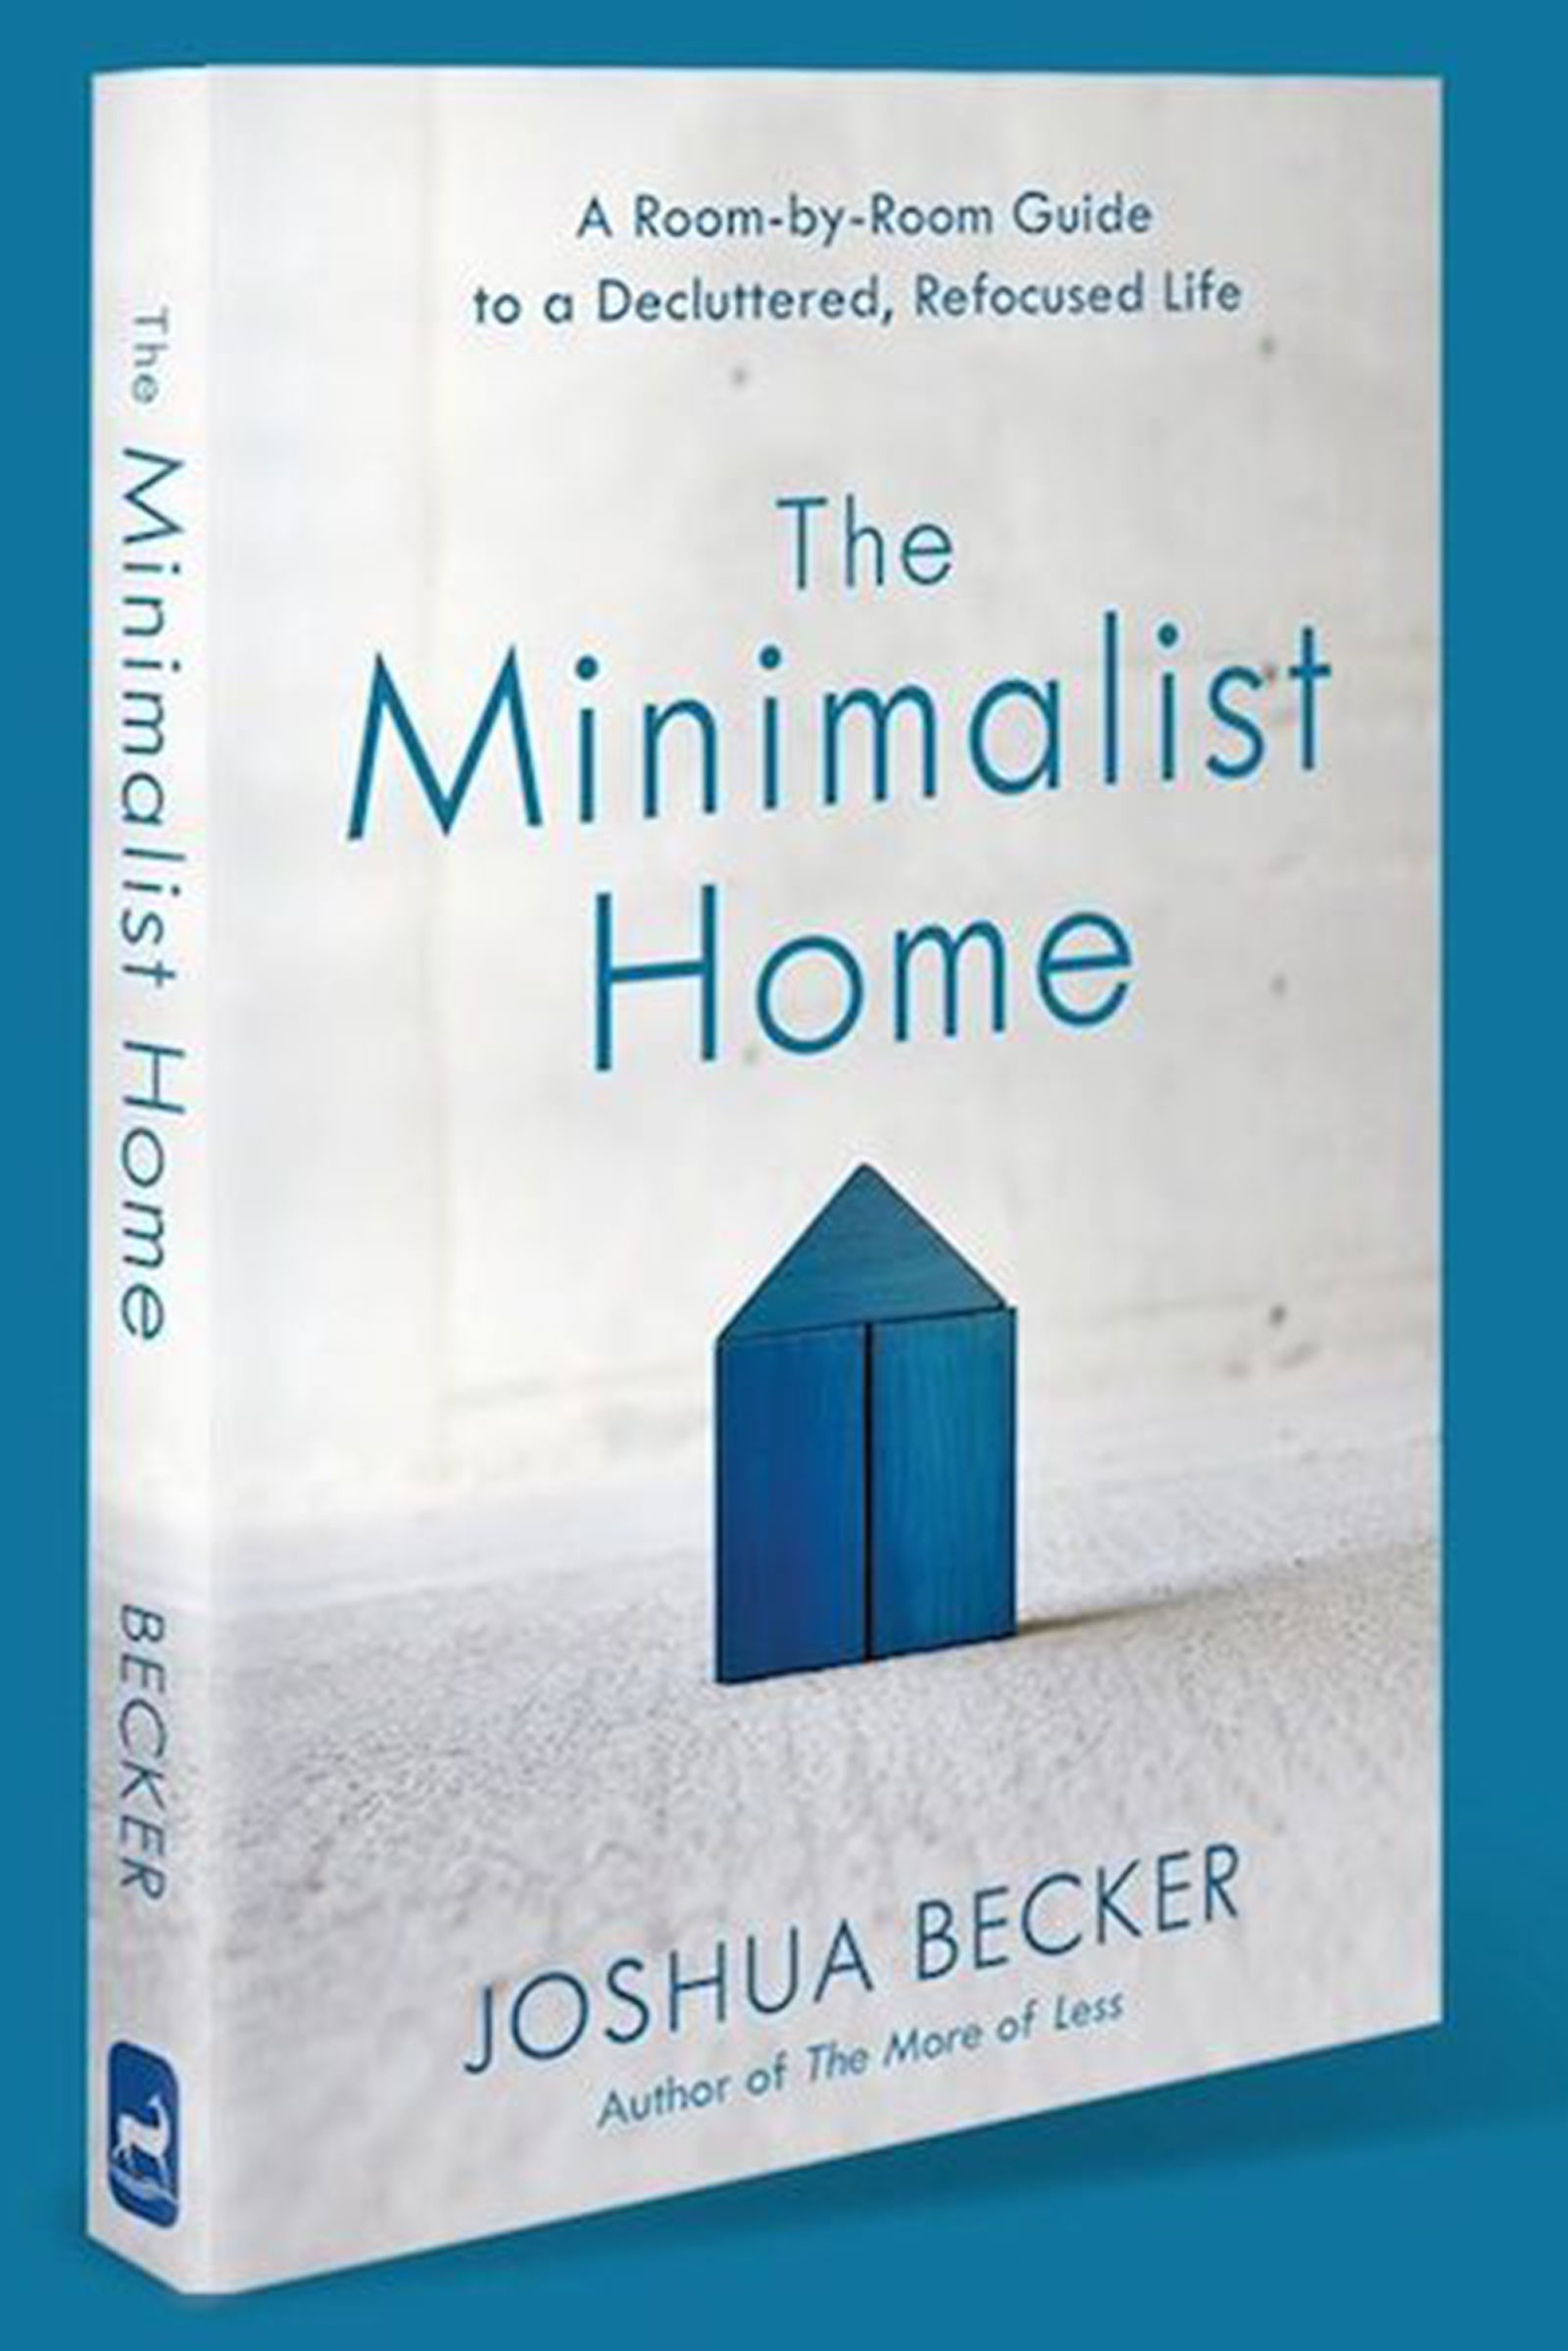 The Minimalist Home: A Room-by-Room Guide to a Decluttered, Refocused Life Hardcover Book by Joshua Becker